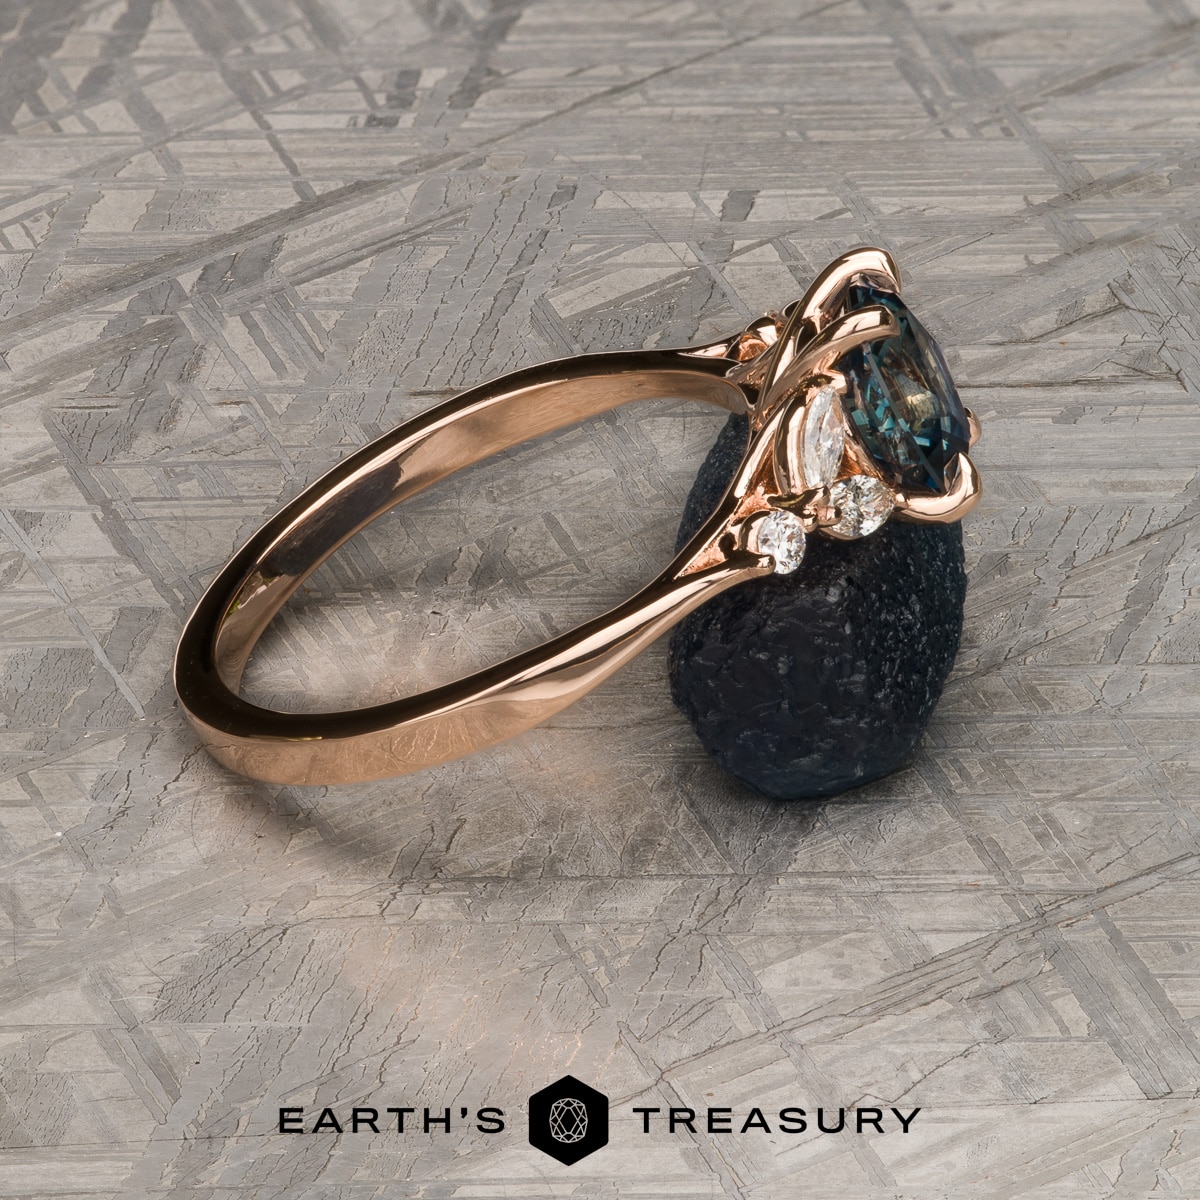 The "Cattleya" ring in 14k rose gold with 1.89-carat Montana sapphire